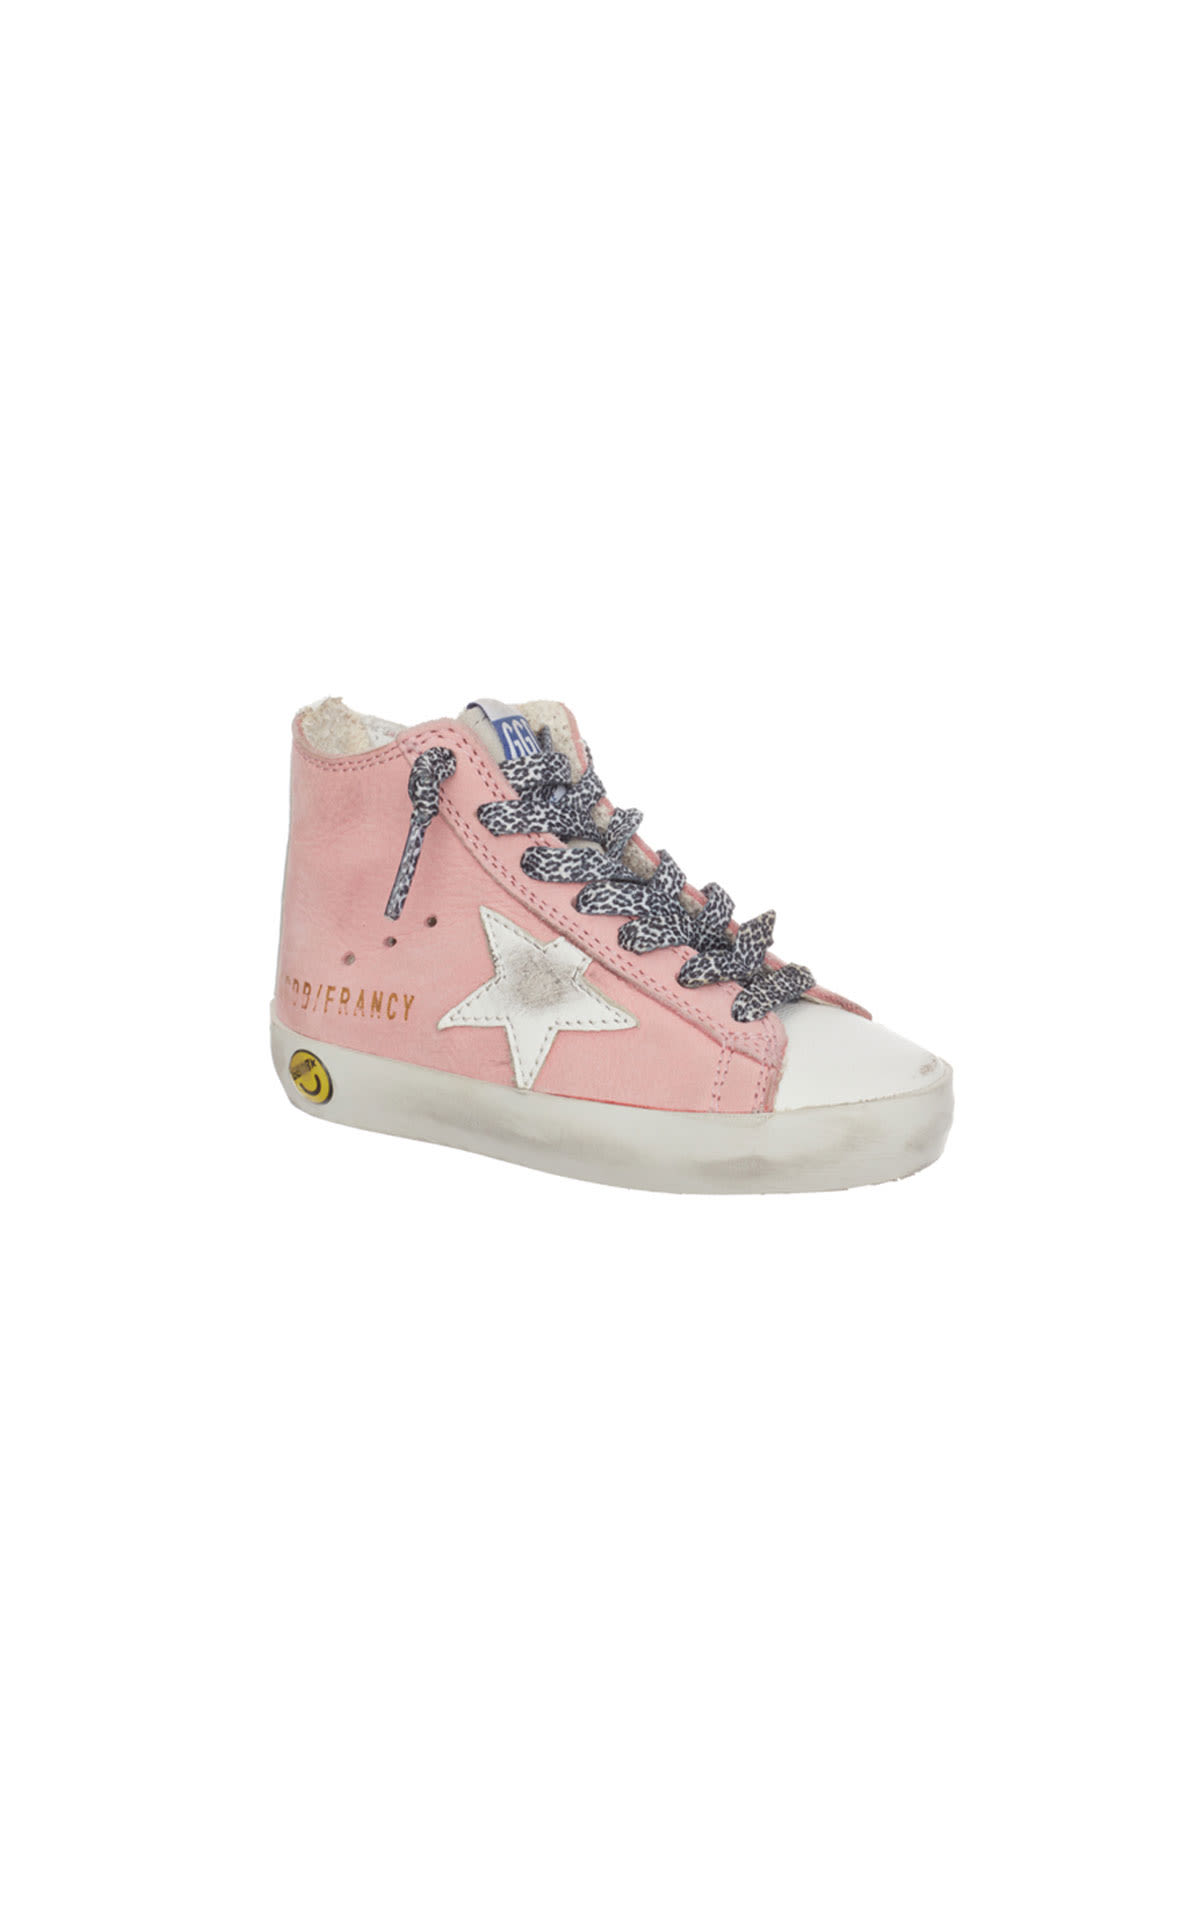 Golden Goose Peony francy kids trainers from Bicester Village